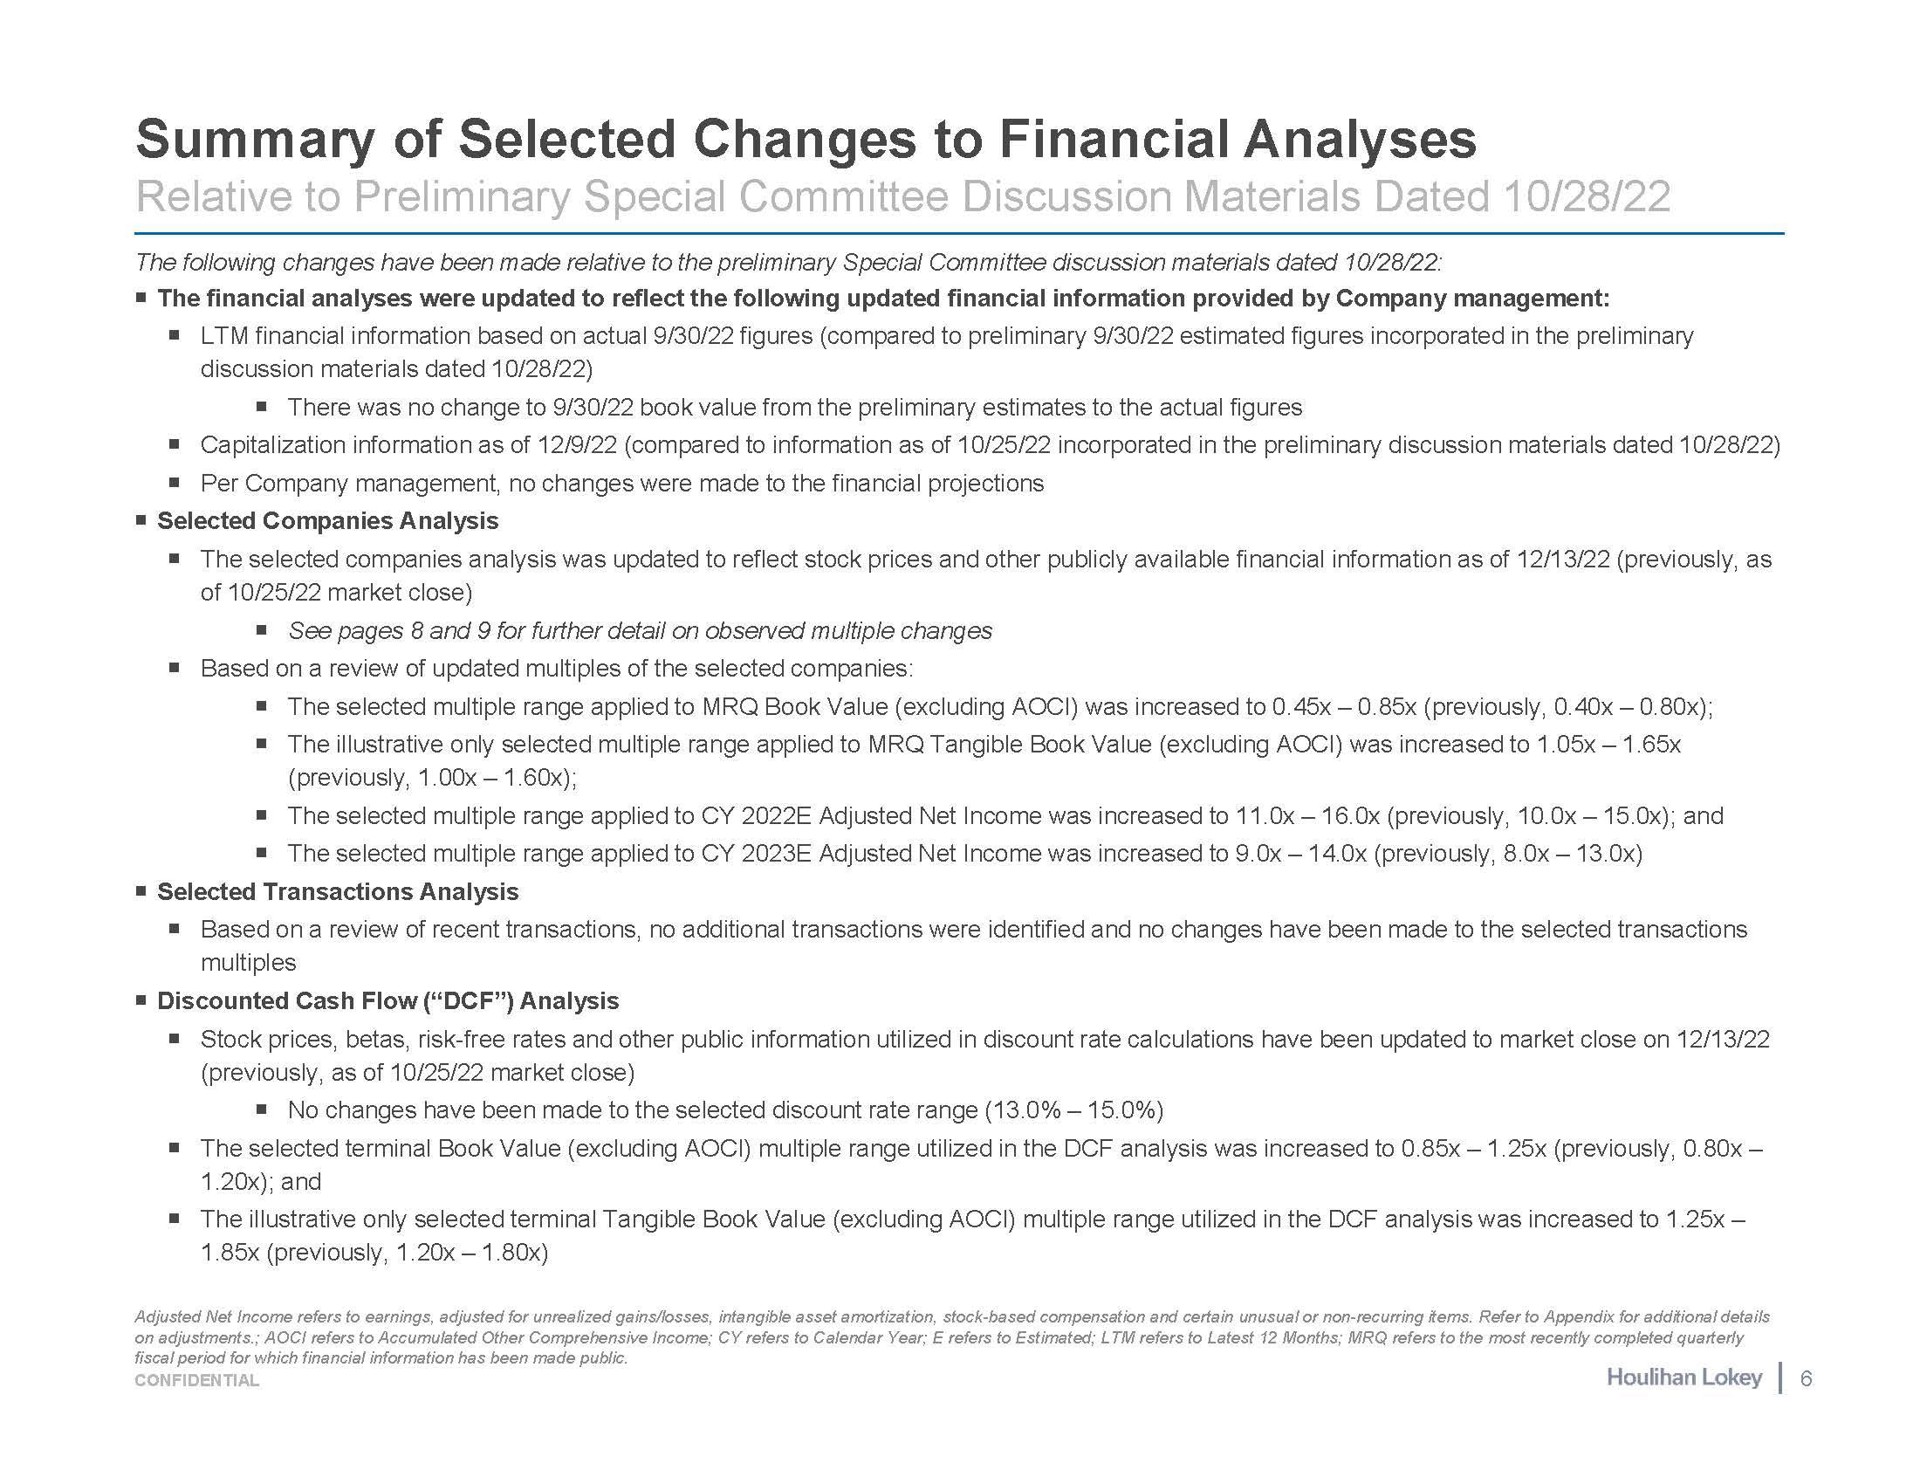 summary of selected changes to financial analyses | Houlihan Lokey